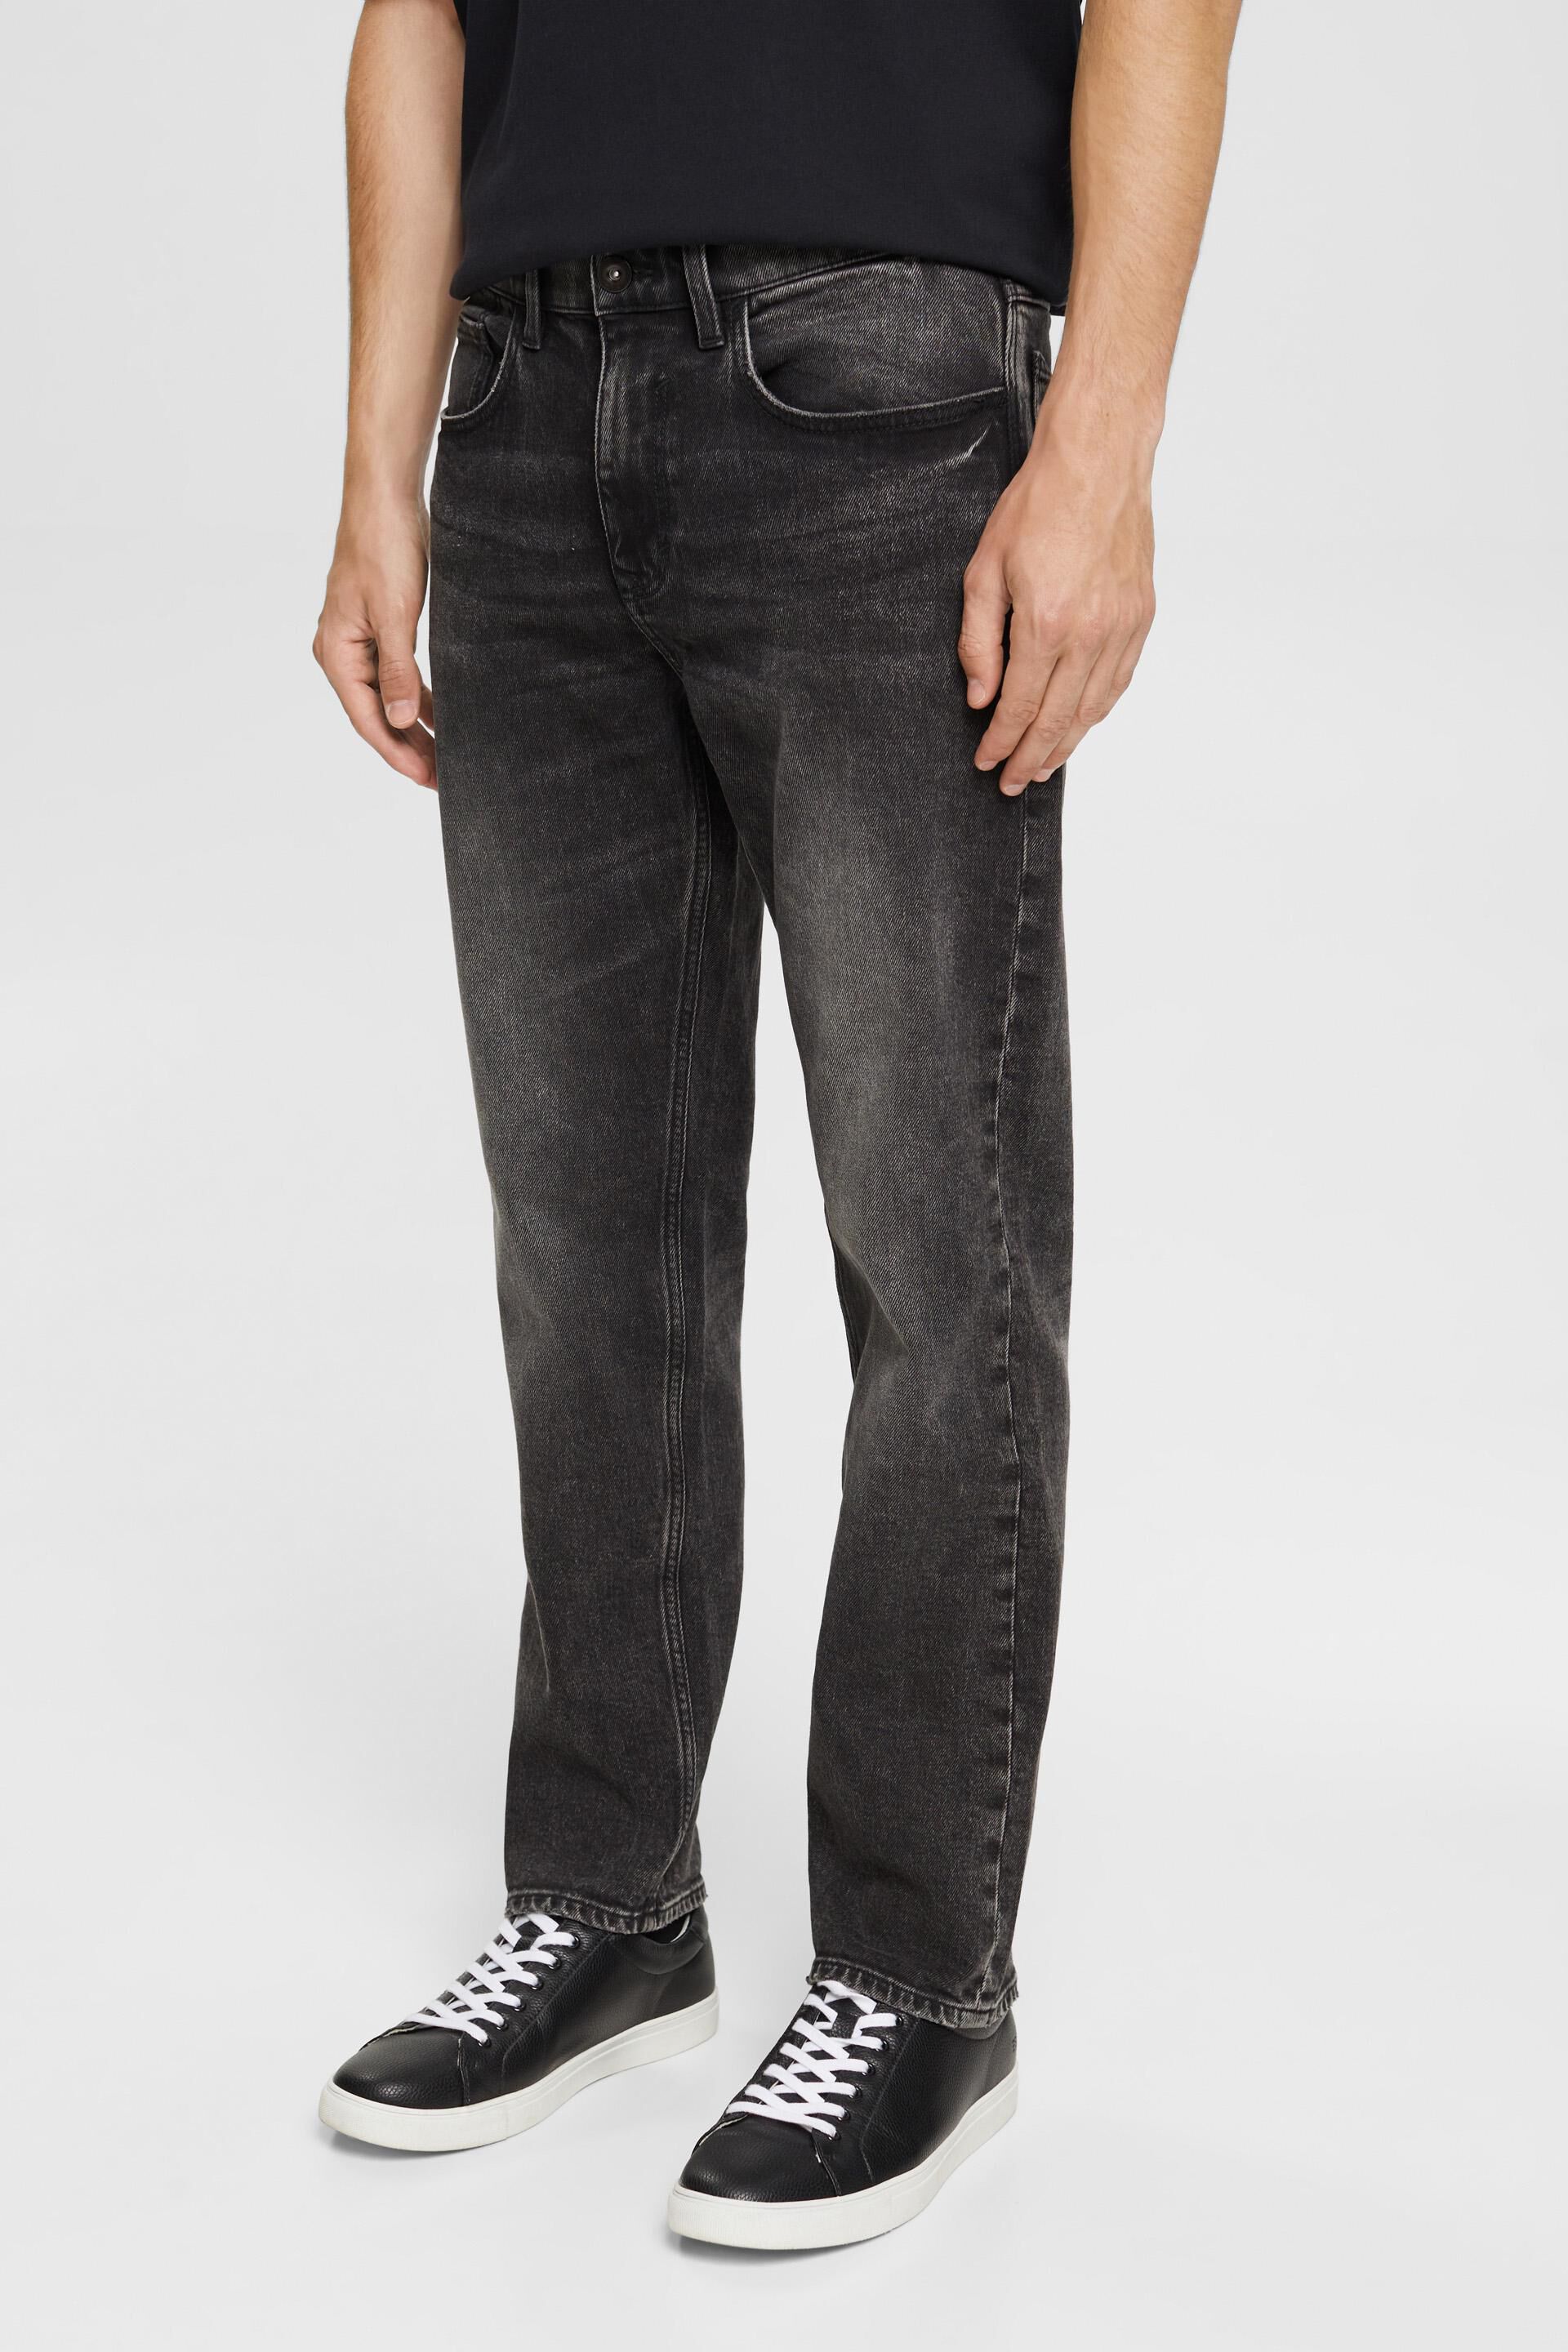 ESPRIT - Washed out shop jeans our at stretch online